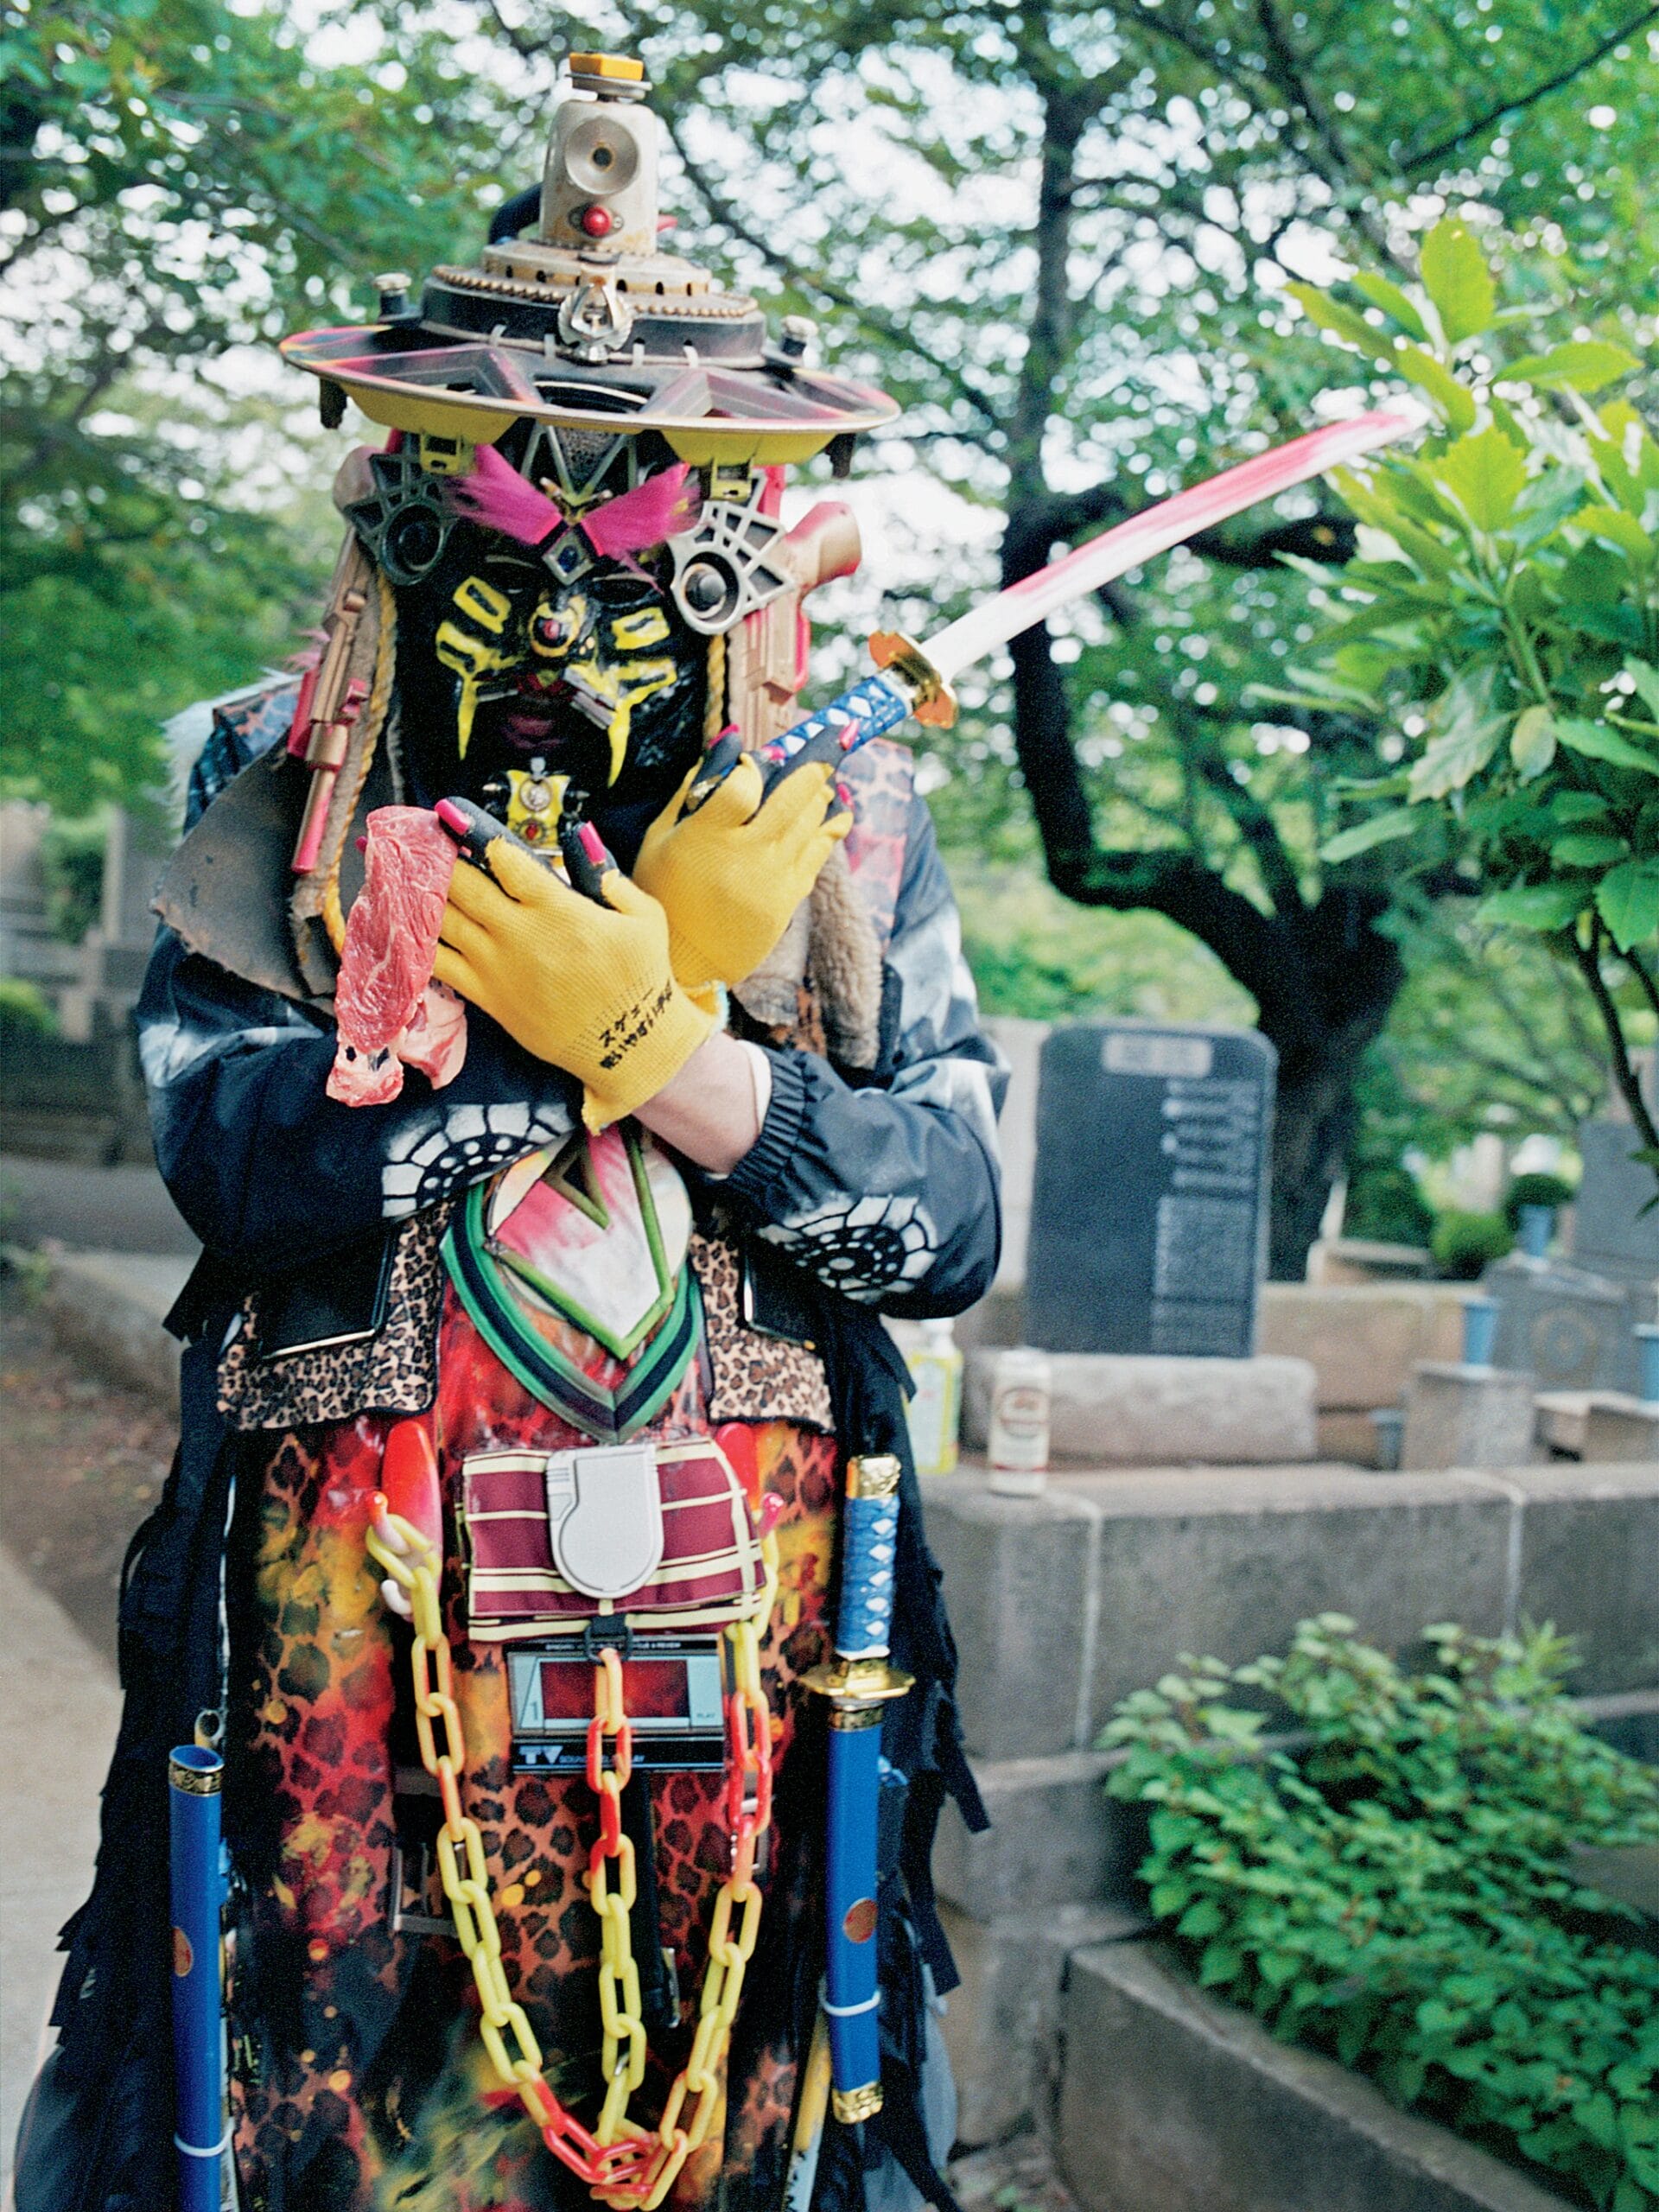 a futuristic costume by Rammellzee, loosely inspired by Japanese samurai